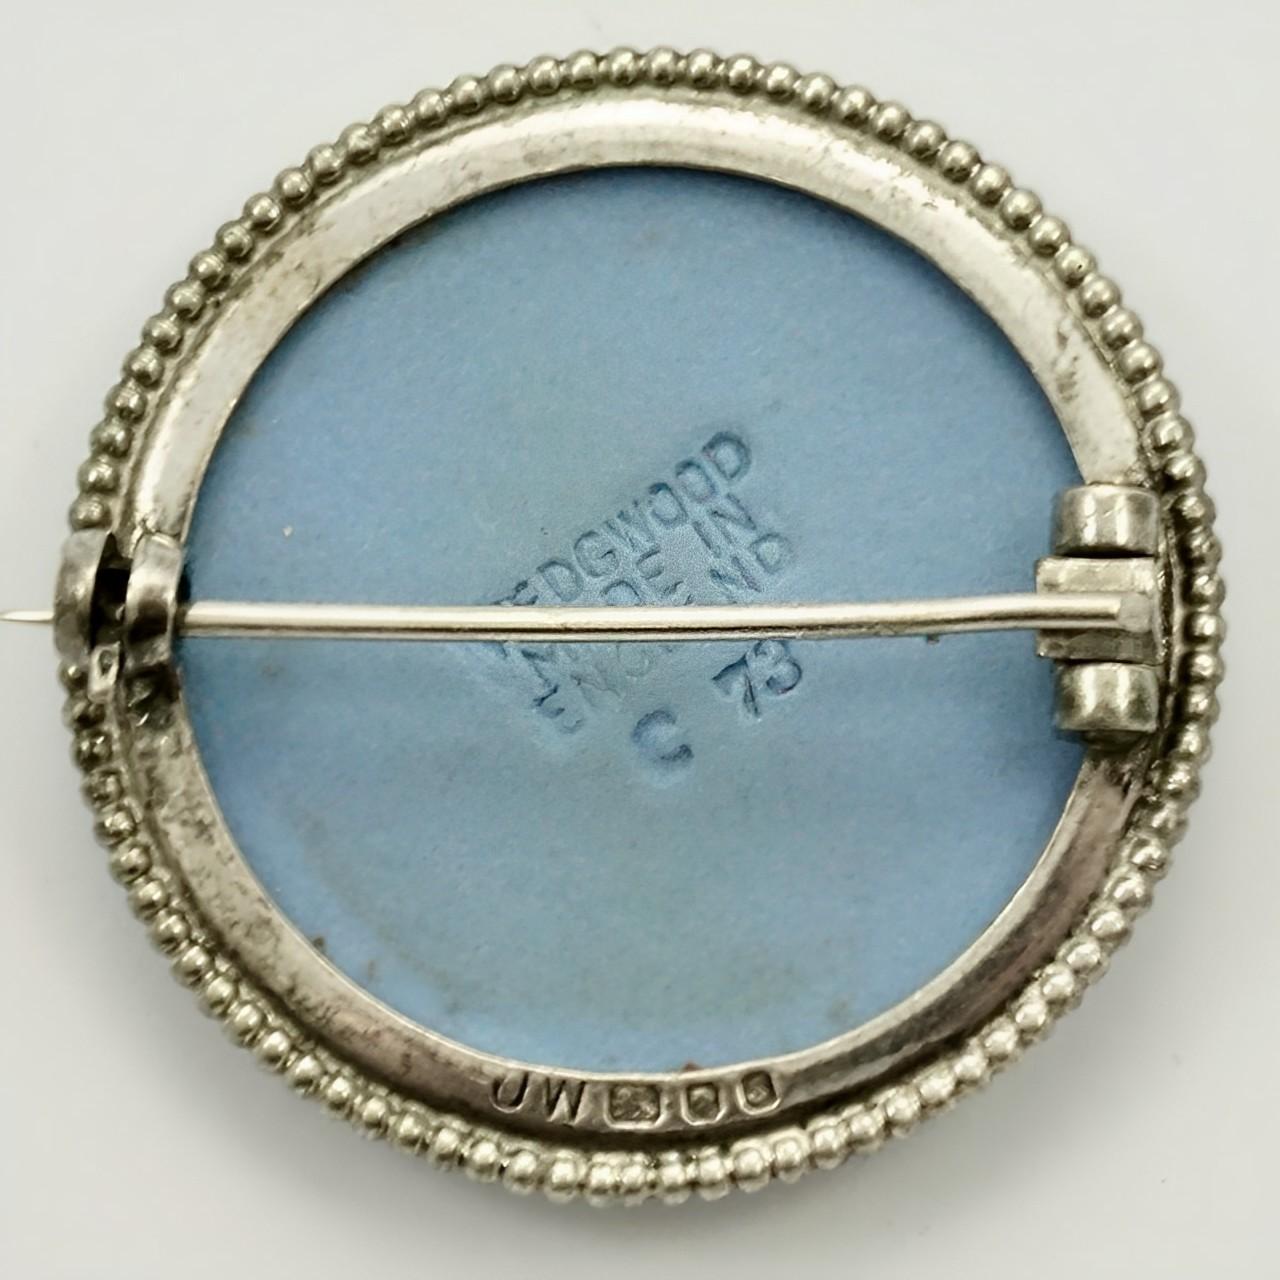 Wedgwood sterling silver and blue jasperware brooch, featuring a classical relief figure with bow and arrows. Measuring diameter 3.1 cm / 1.2 inches. The silver is stamped with a lion, a leopard's head, and the letter S. The makers mark is JW. This